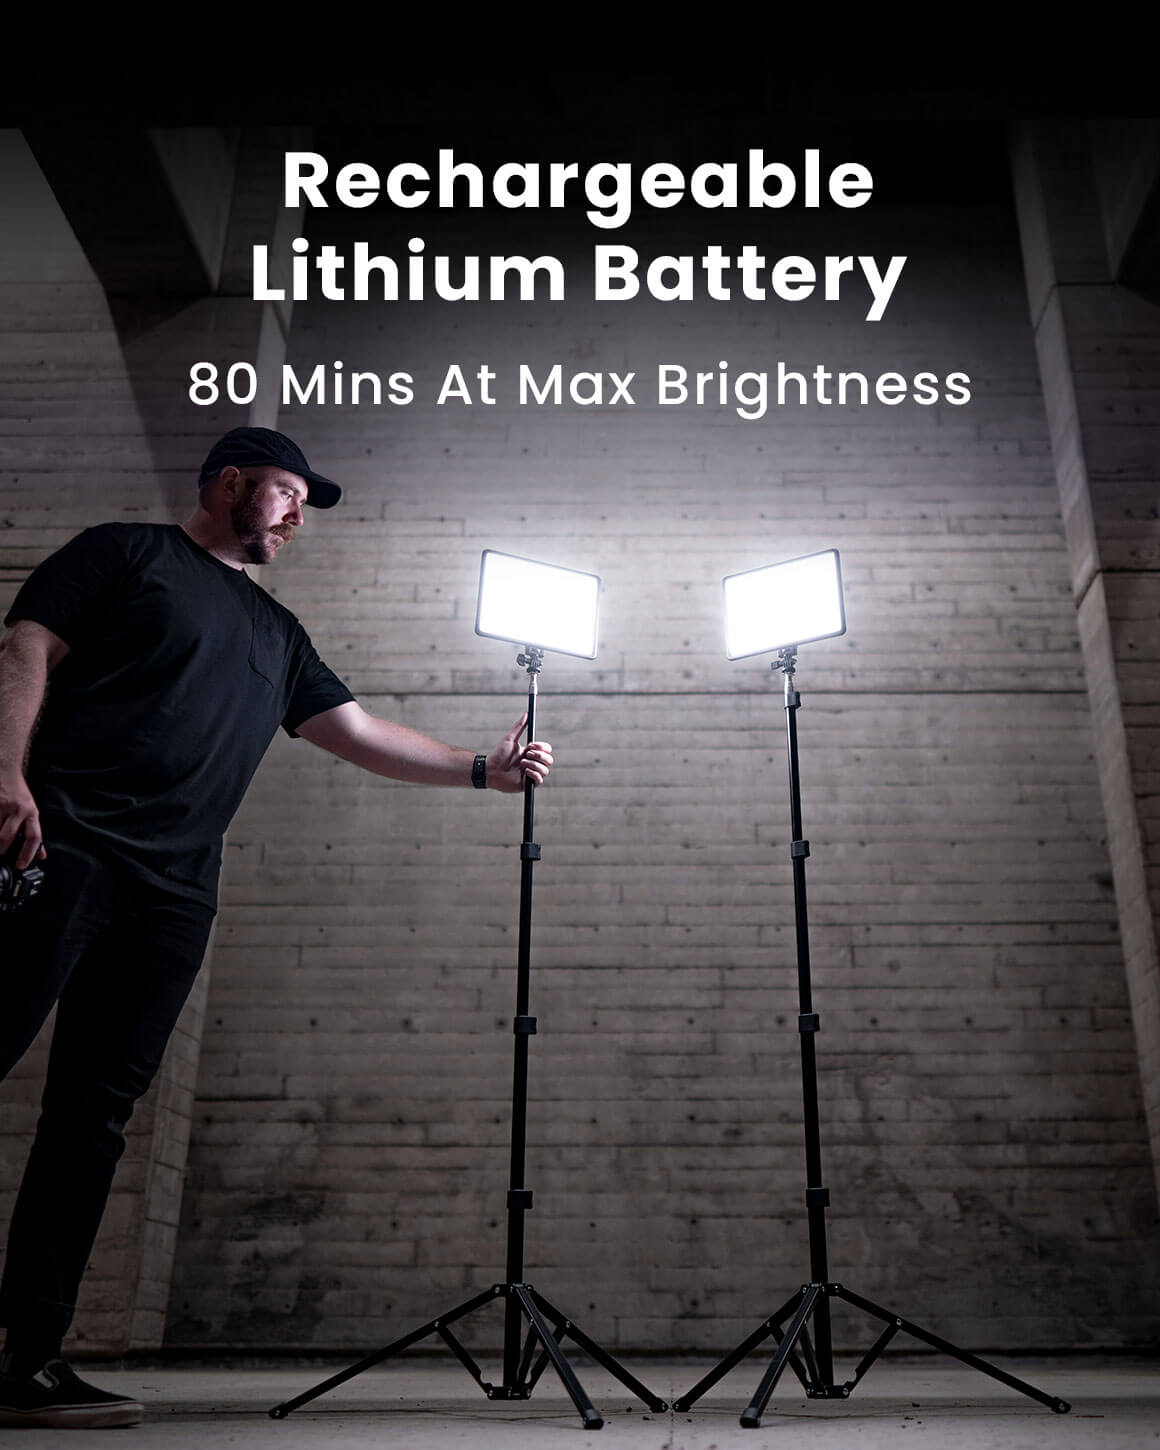 Rechargeable Lithium Battery.  80 minutes at max brightness.  Man standing next to 2 Lume Cube Studio Panels on 70" stands in a dark room.